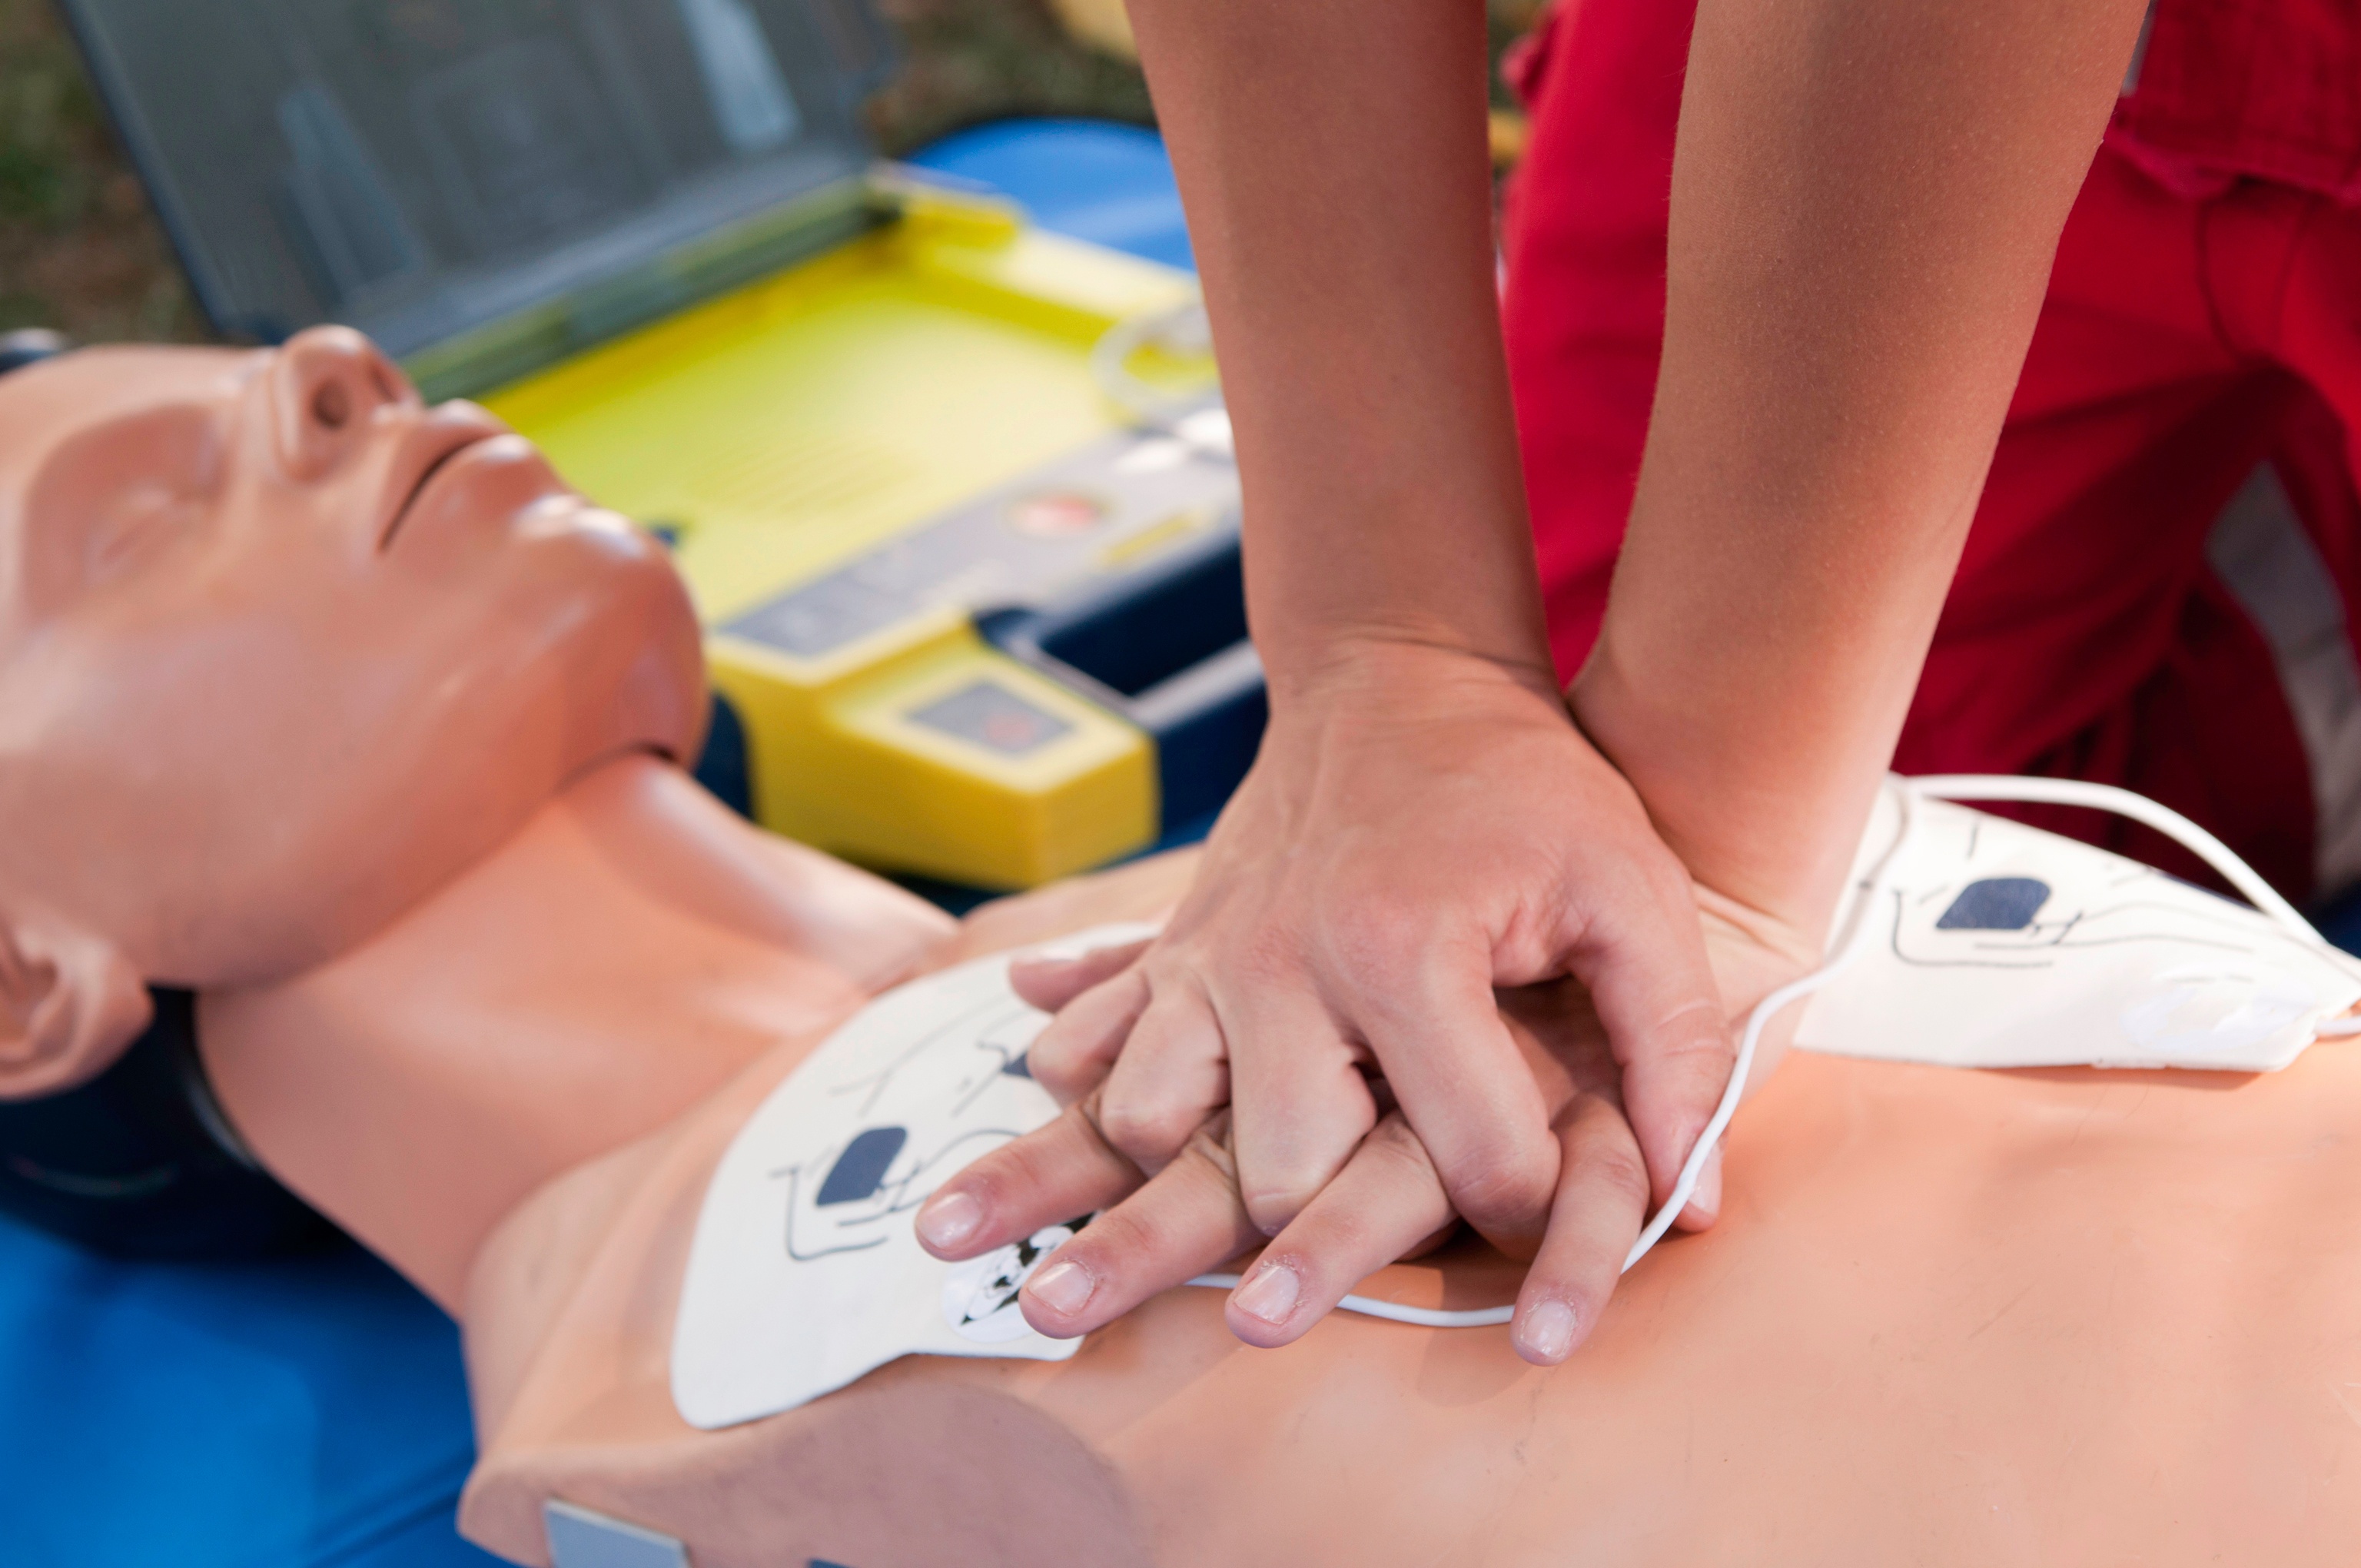 having a defibrillator in your medical bag prevents on field deaths